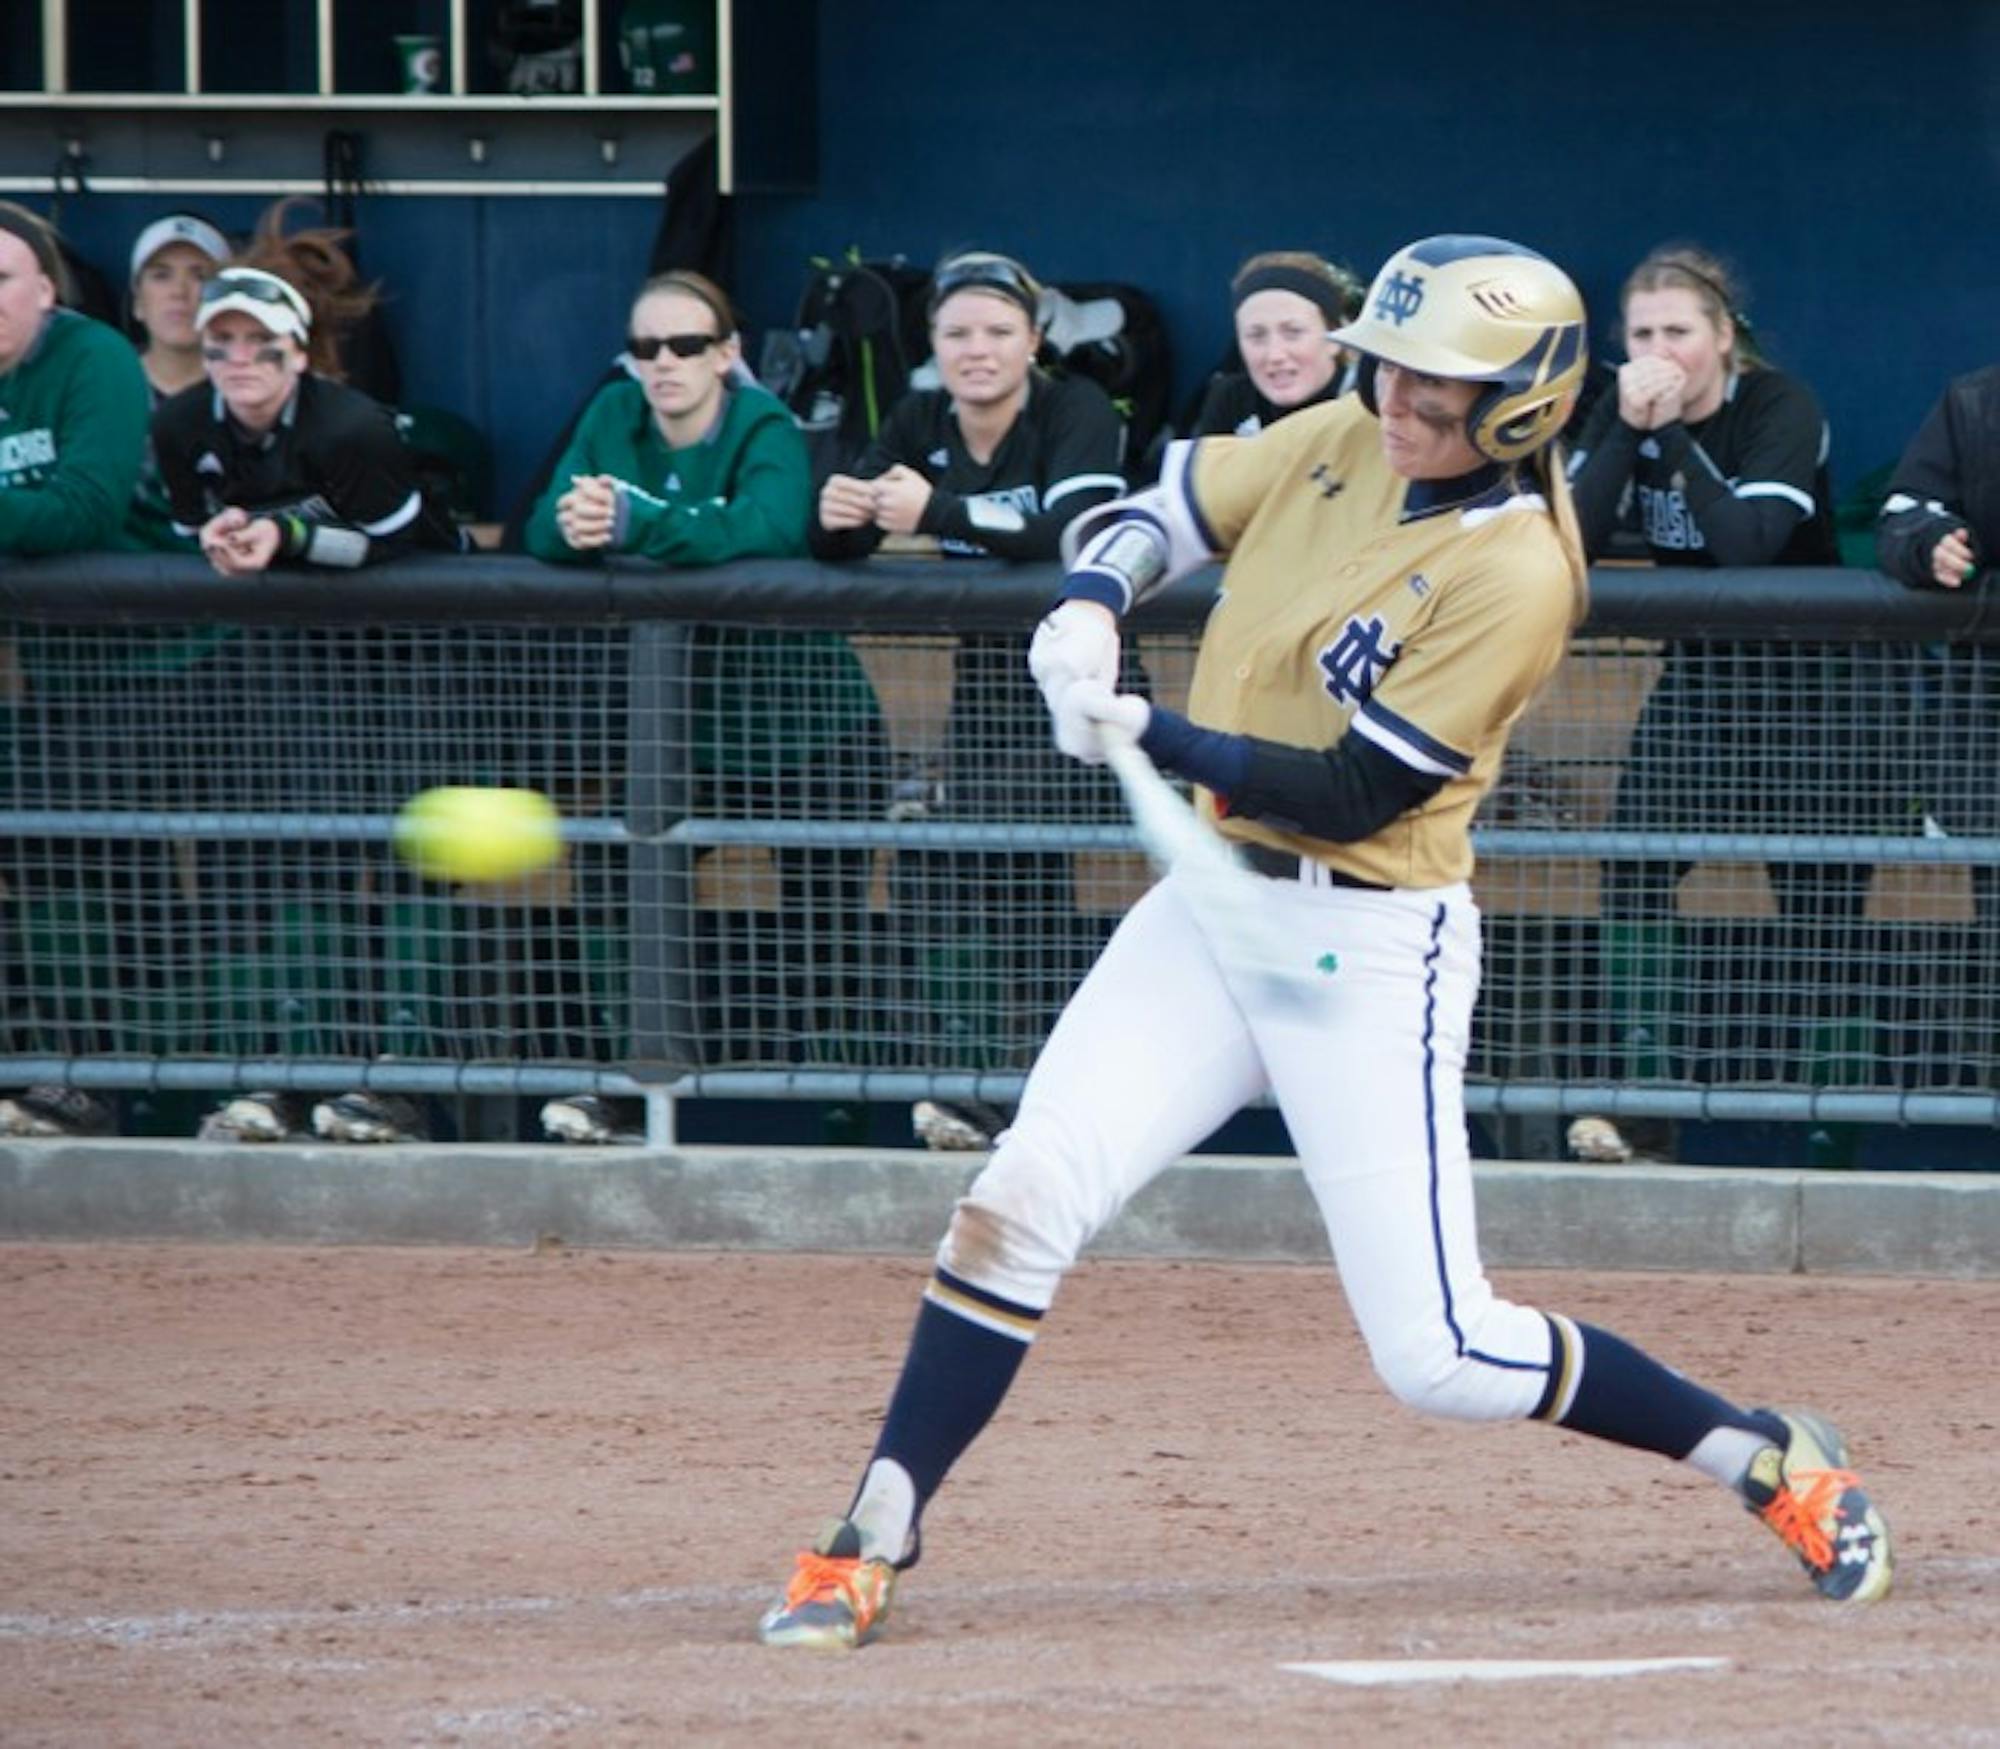 Irish junior center fielder Karley Wester swings at an approaching pitch during Notre Dame's 10-2 win over Eastern Michigan at Melissa Cook Stadium on March 22. She leads the team with 55 hits.